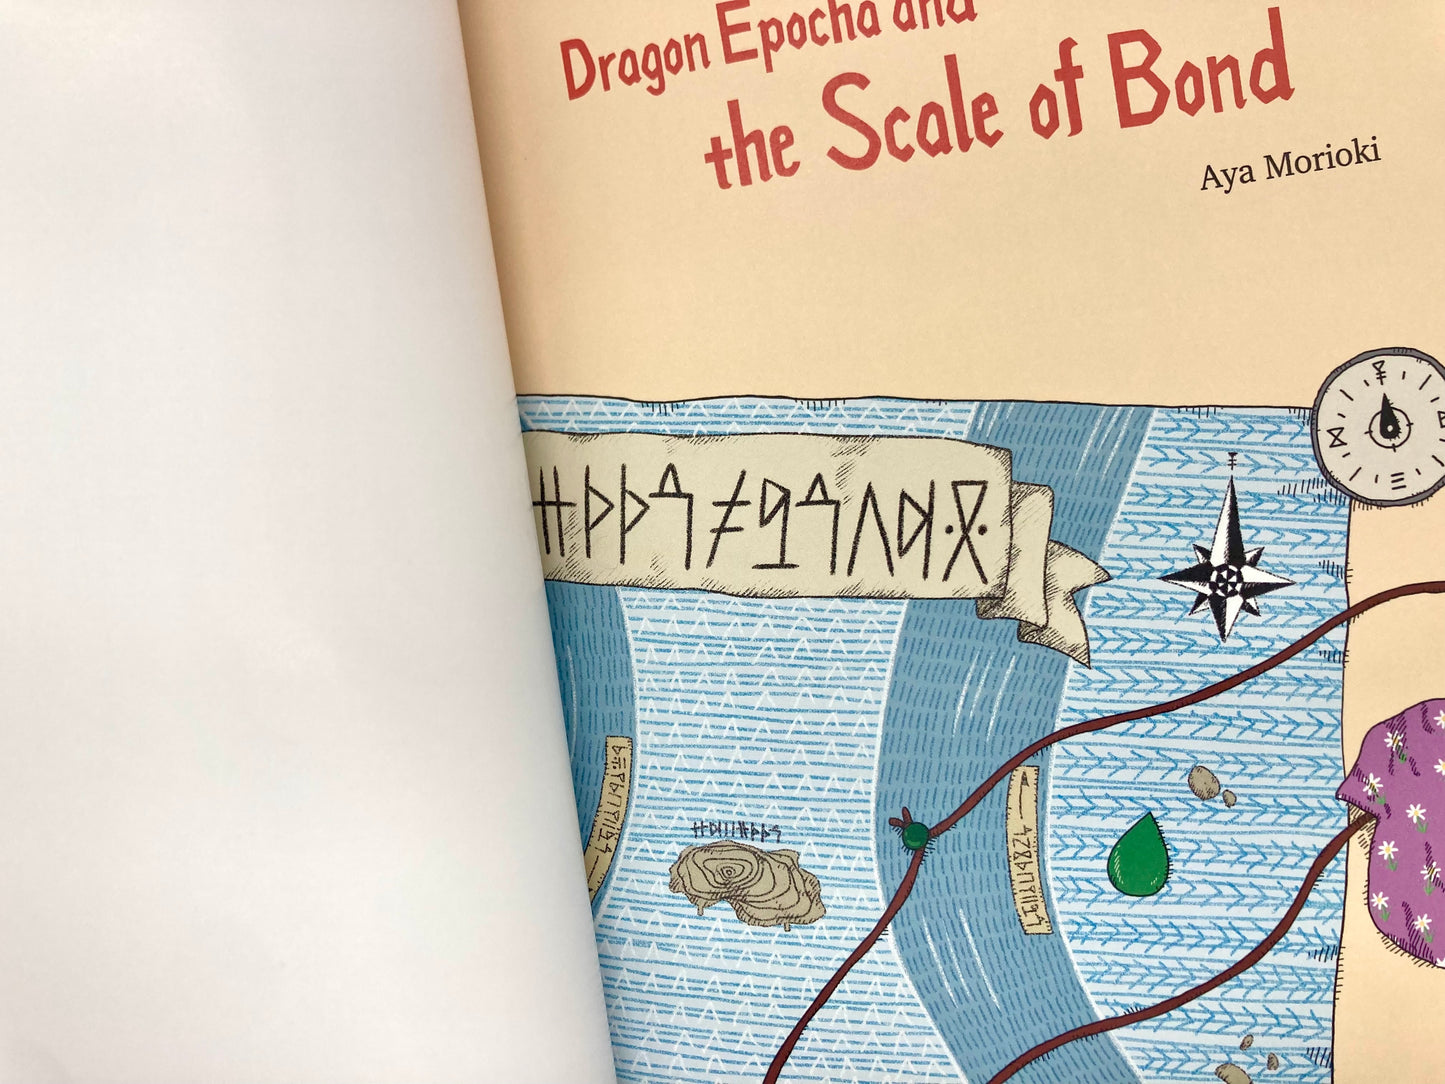 Picture book "Dragon Epocha and the Scale of Bond" (Series Ep.3)